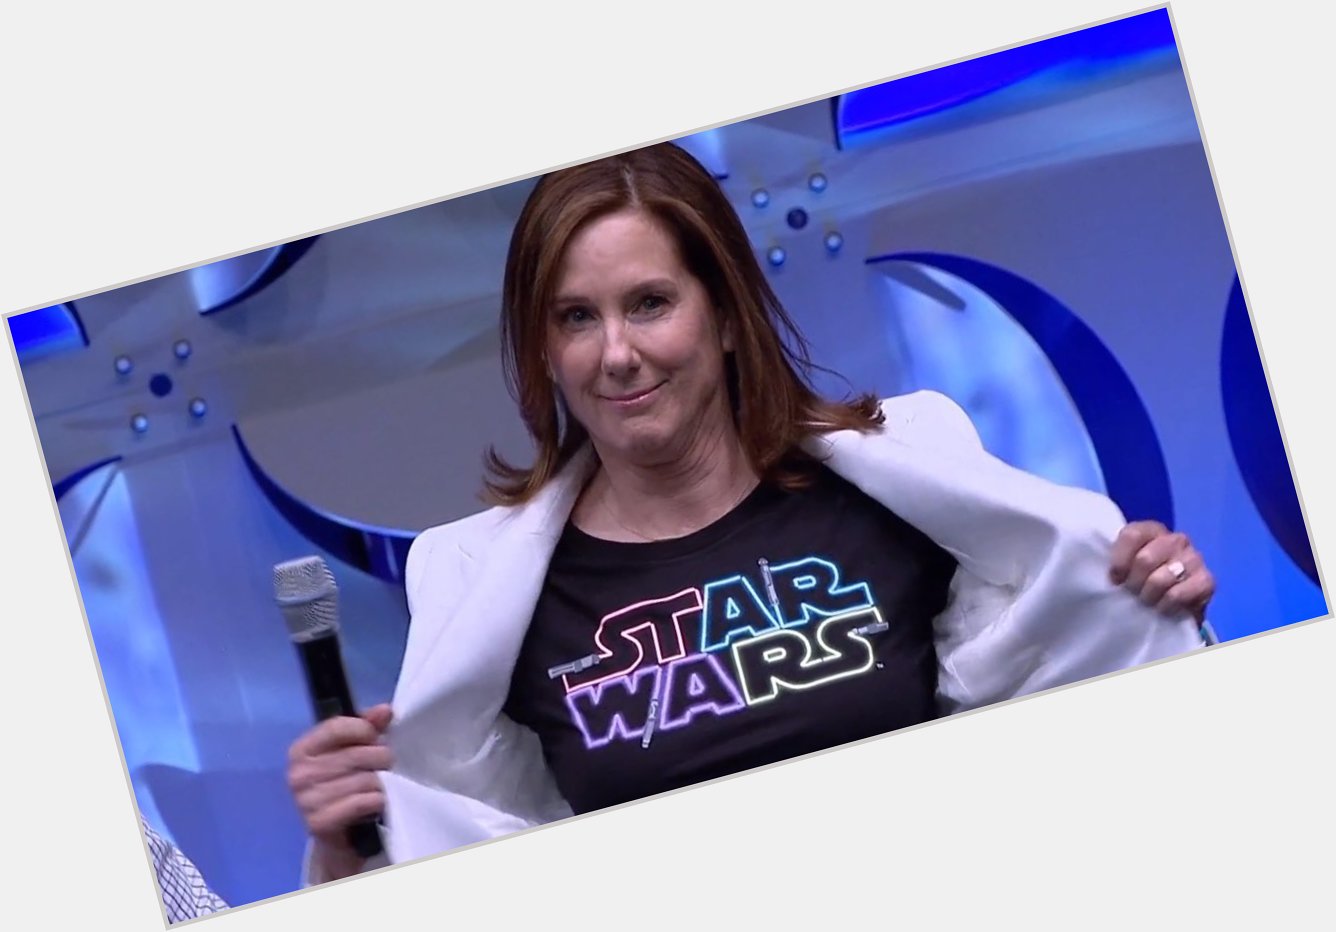 Happy birthday to Kathleen Kennedy! May the Force be with you! 